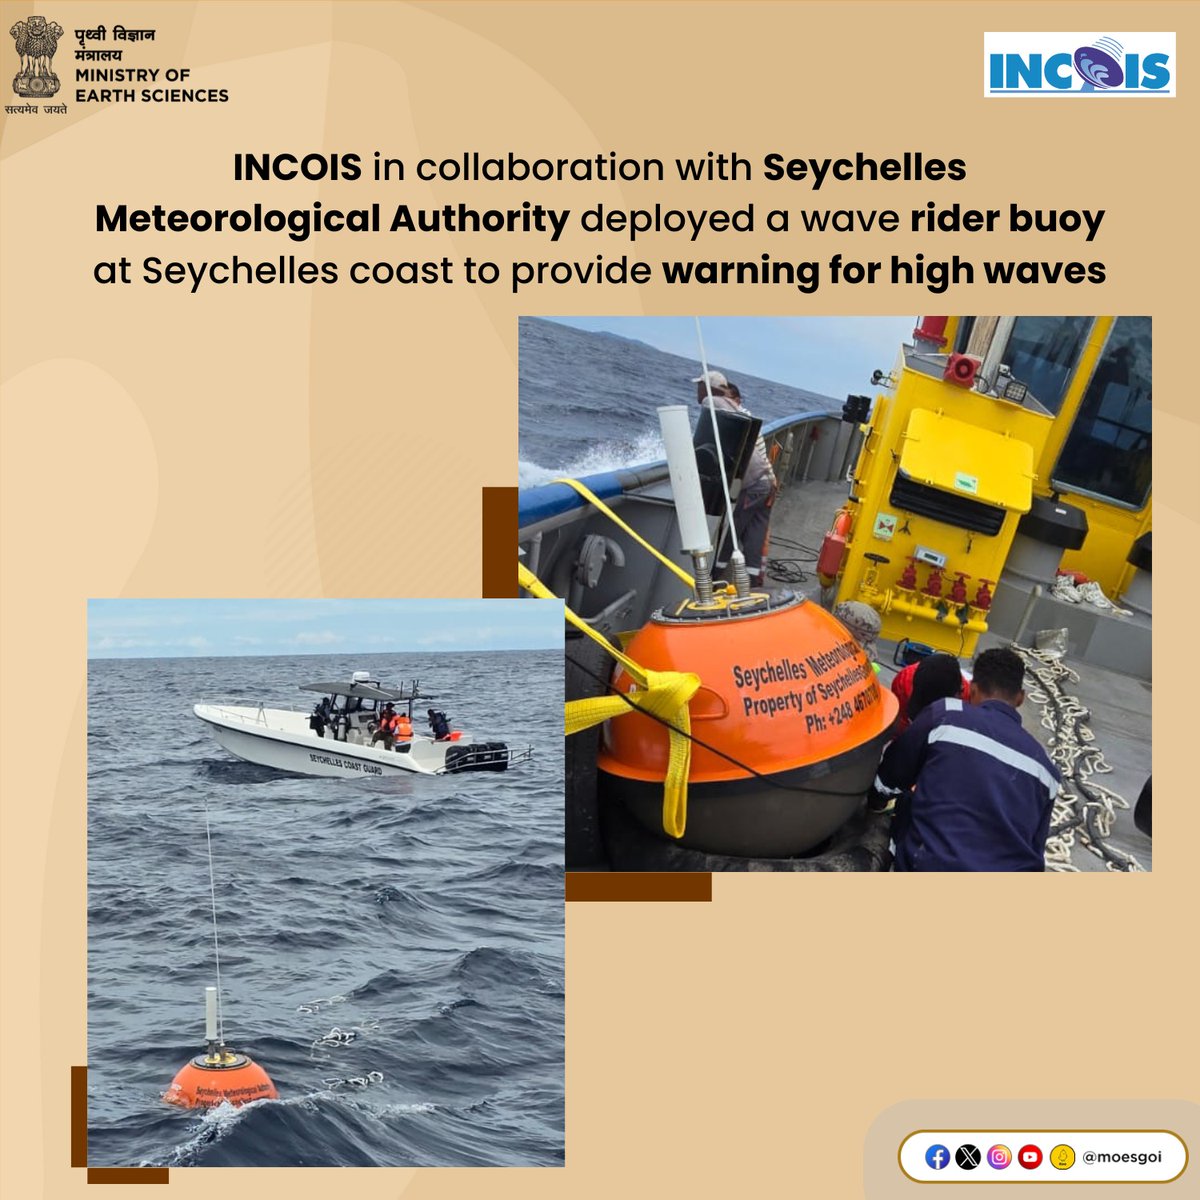 INCOIS and Seychelles Meteorological Authority (SMA) have formed a collaborative effort to enhance maritime safety in #Seychelles, deployed a wave rider buoy. This initiative aims to strengthen safety of Seychelles' maritime activities, ensuring protection at sea. #OceanSafety